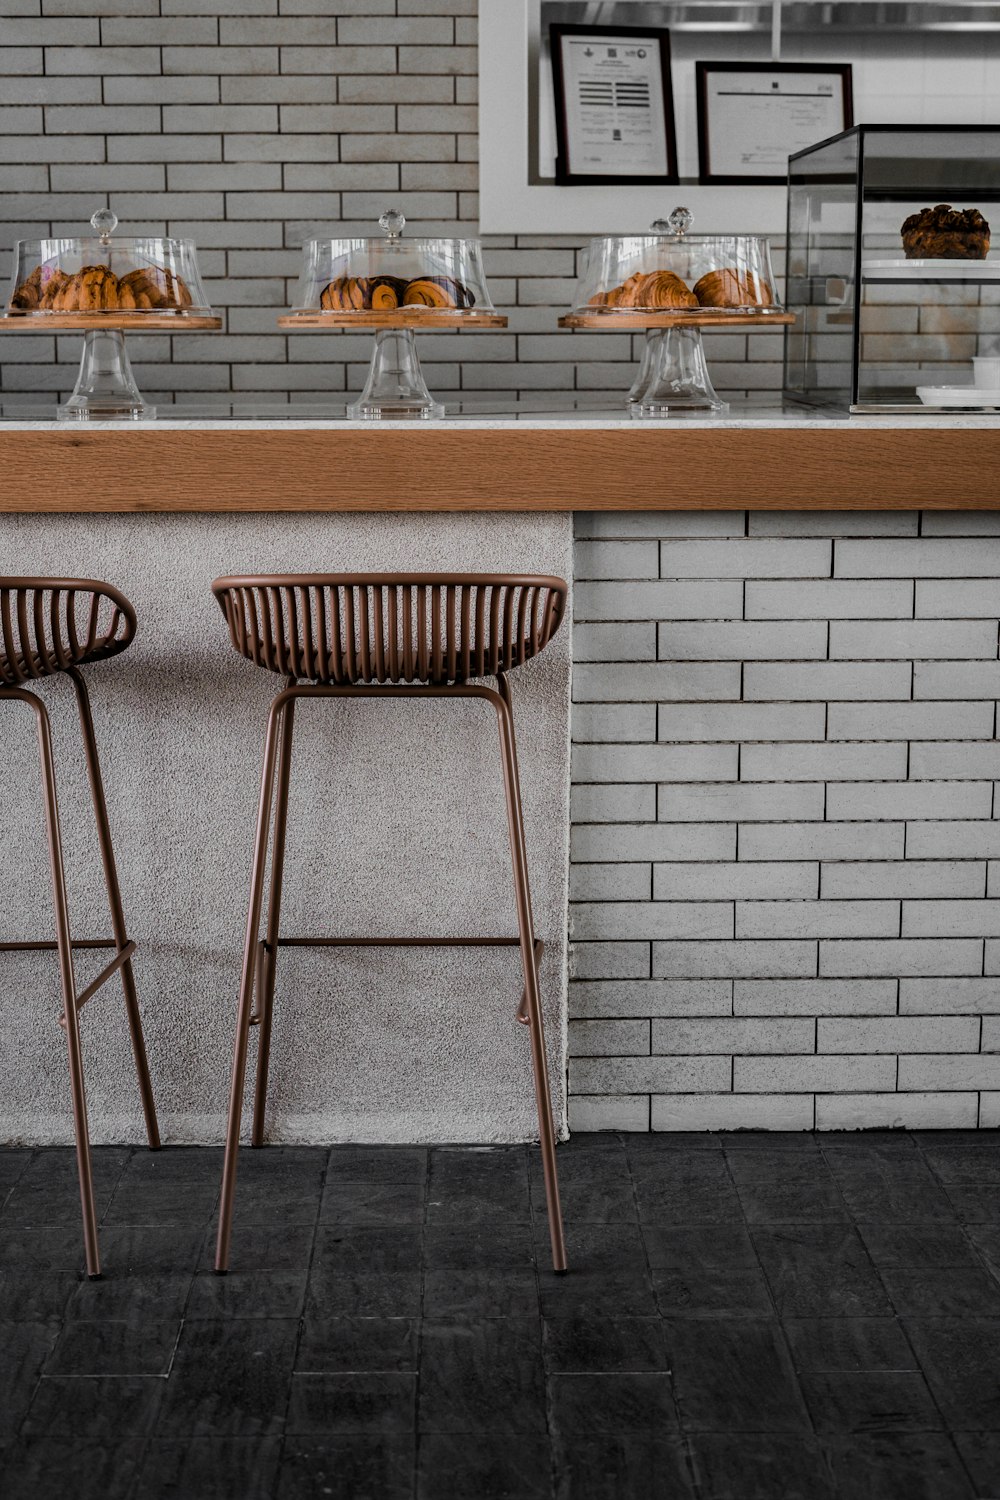 two stools sitting in front of a counter with pastries on it